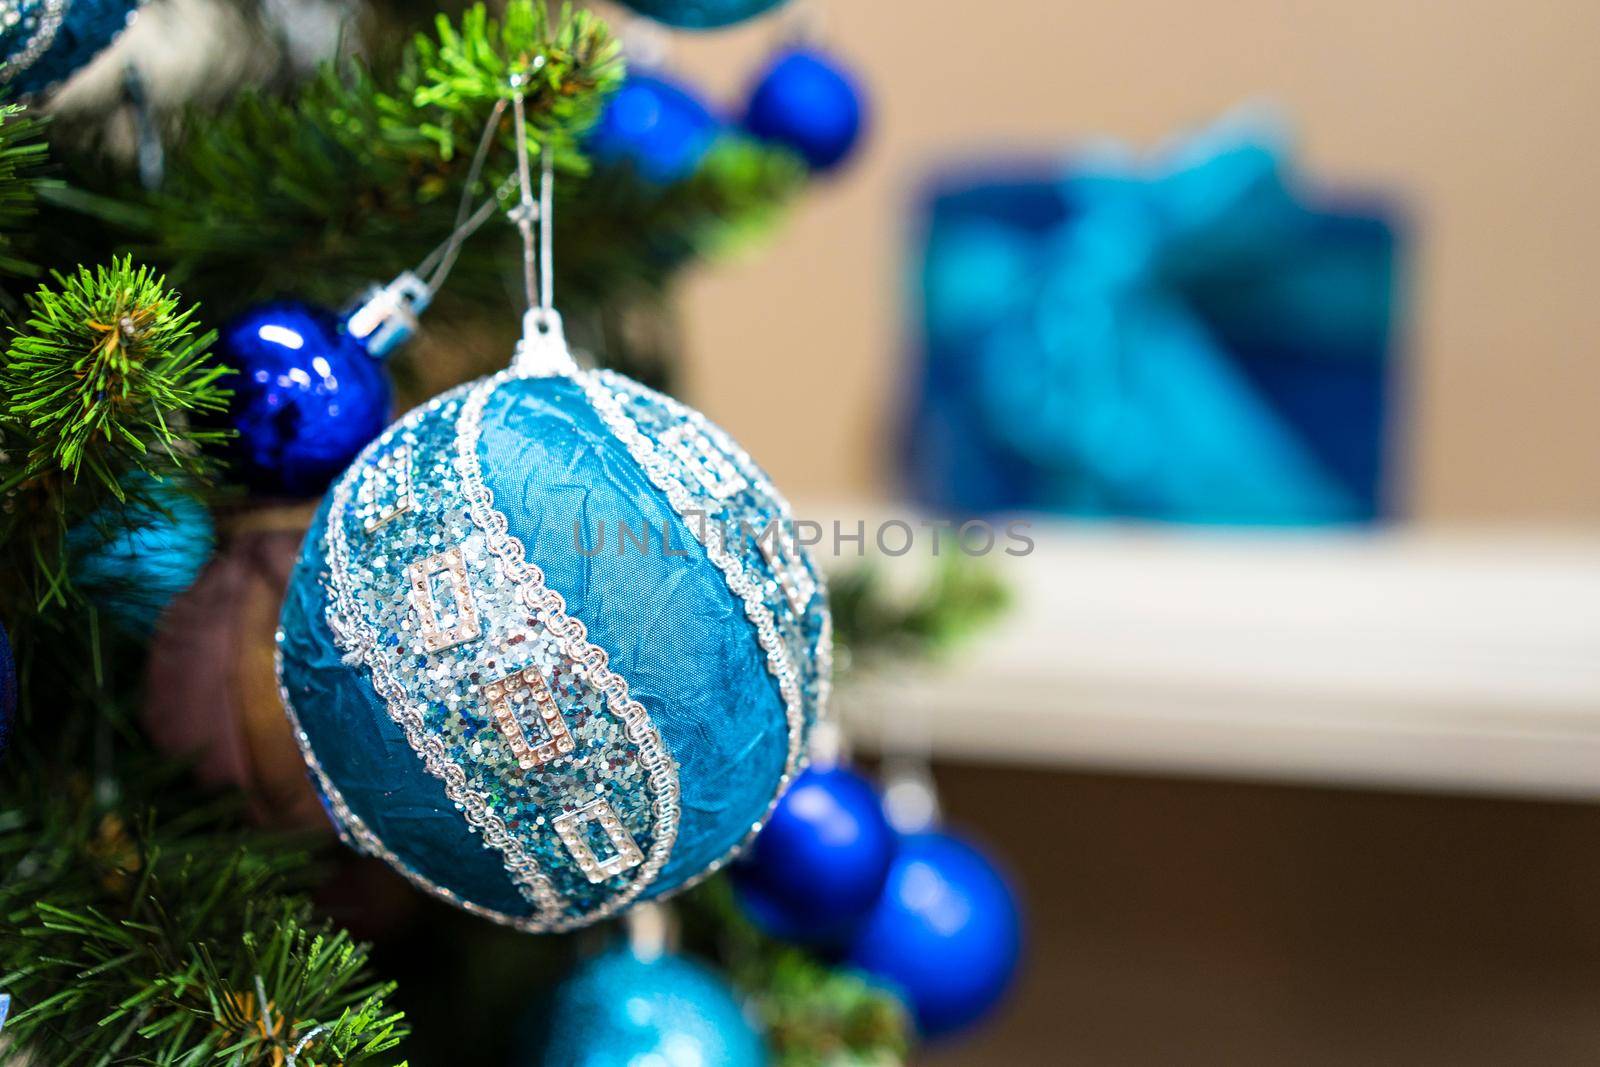 Green Christmas Tree With Beautiful White and Blue Decorations. Closed-Up shot. Big Beautiful New Year Decoration of Blue and White. Winter Season Holidays.